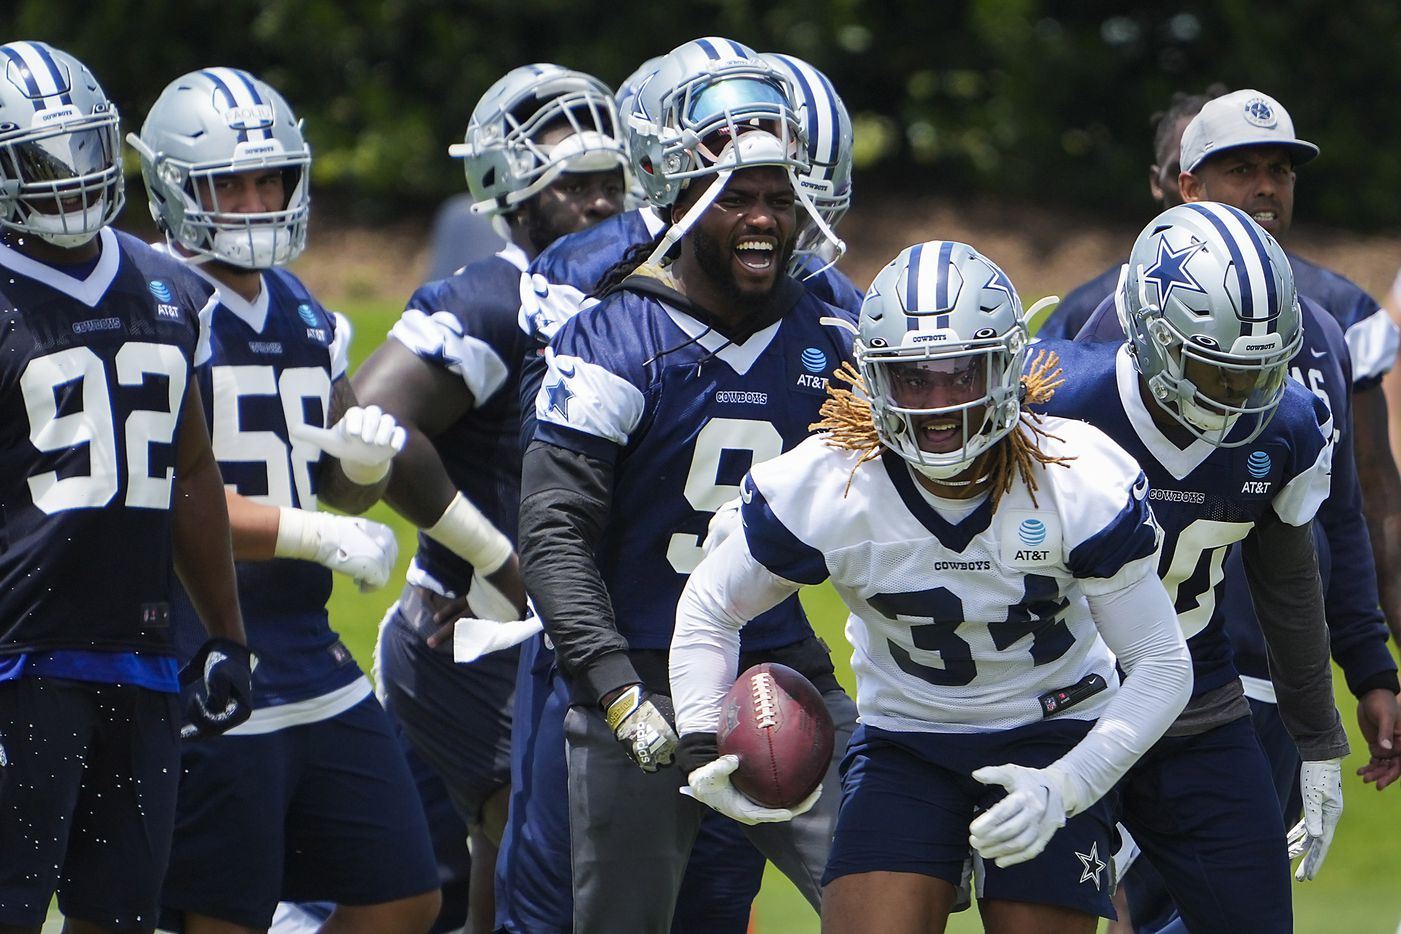 Dallas Cowboys running back Rico Dowdle (34) gets past cornerback Anthony Brown (30) as linebacker Jaylon Smith (9) reacts during a minicamp practice at The Star on Tuesday, June 8, 2021, in Frisco. (Smiley N. Pool/The Dallas Morning News)